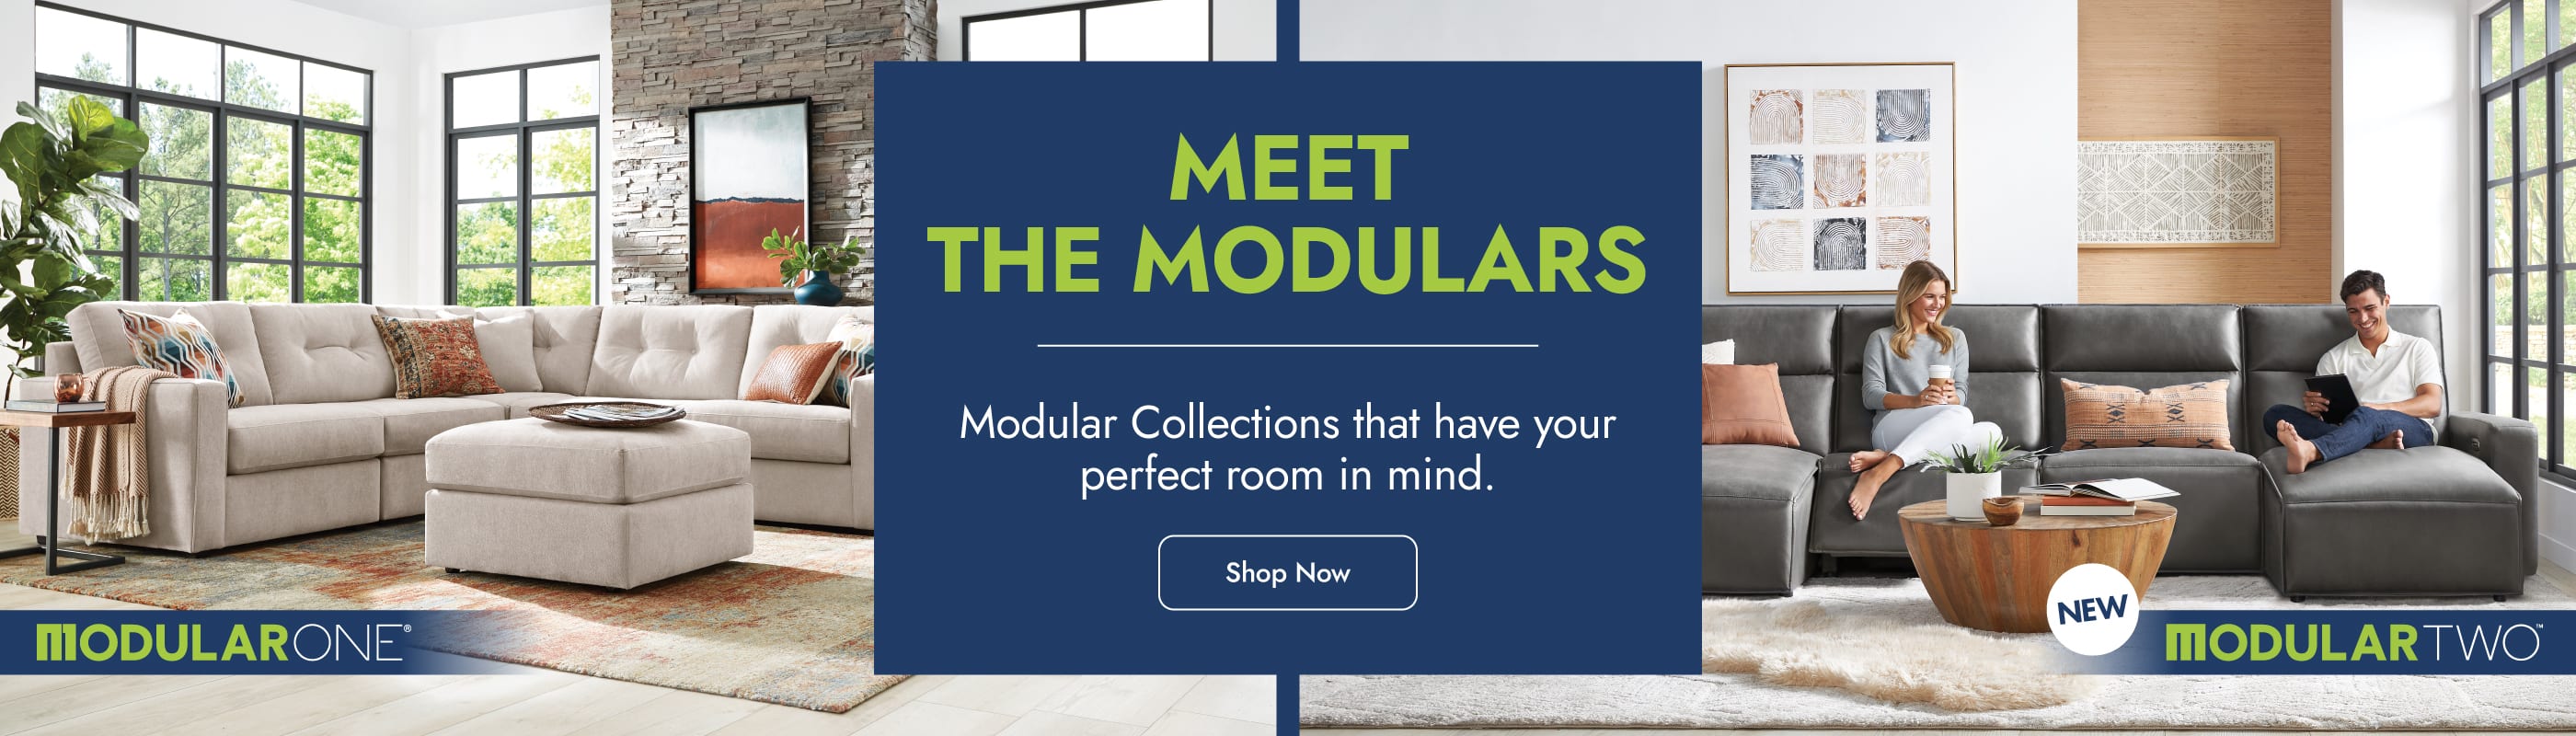 Meet the Modulars - ModularOne and ModularTwo collections that have your perfect room in mind.